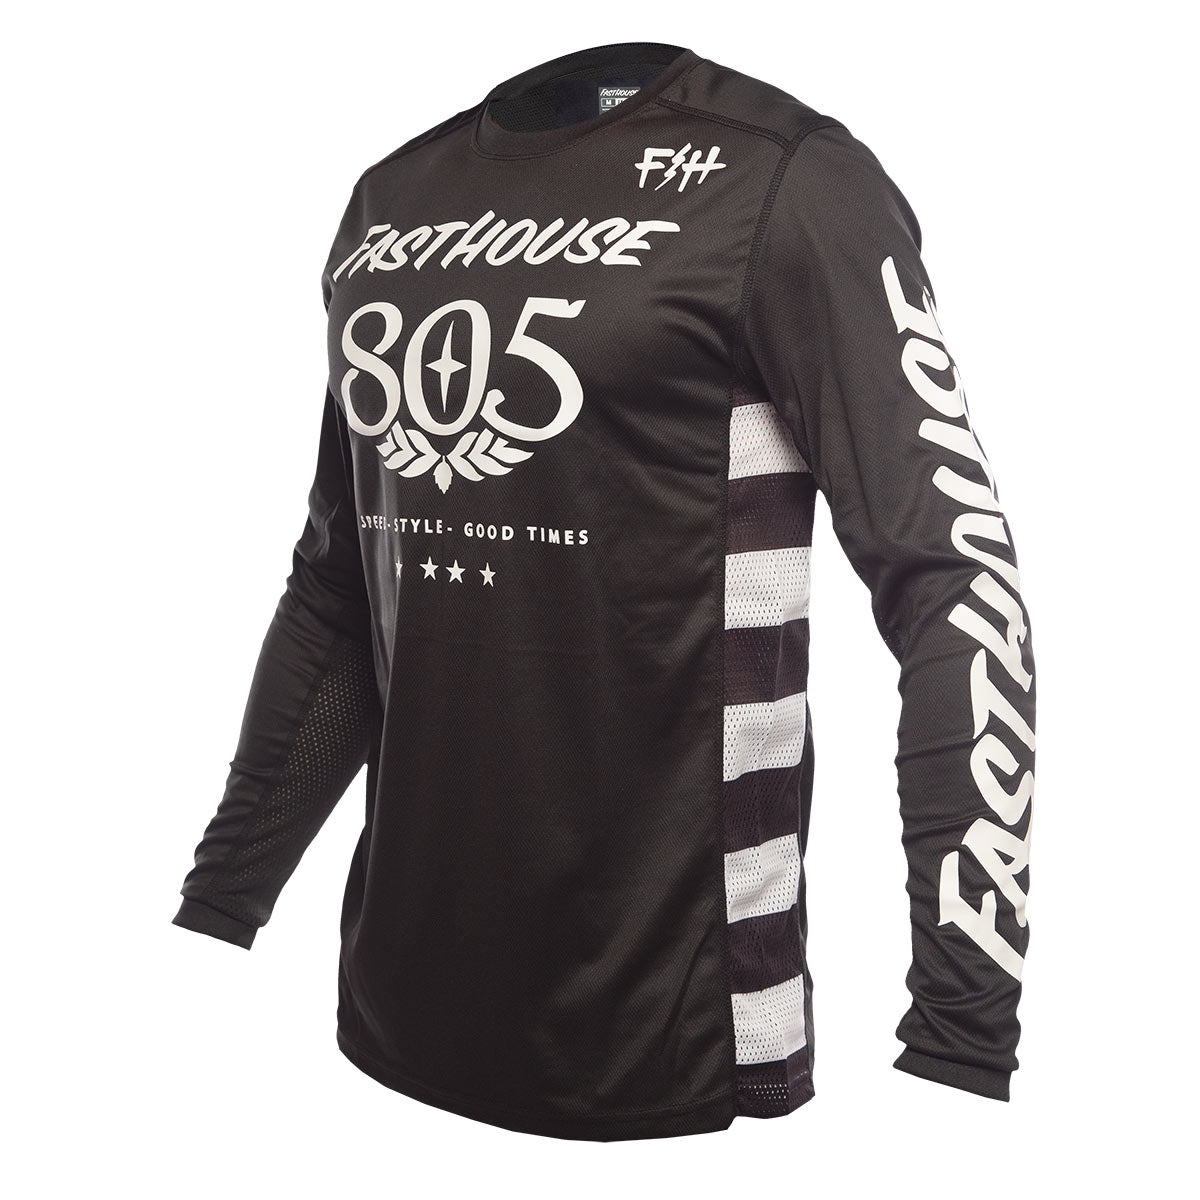 fasthouse jersey mtb